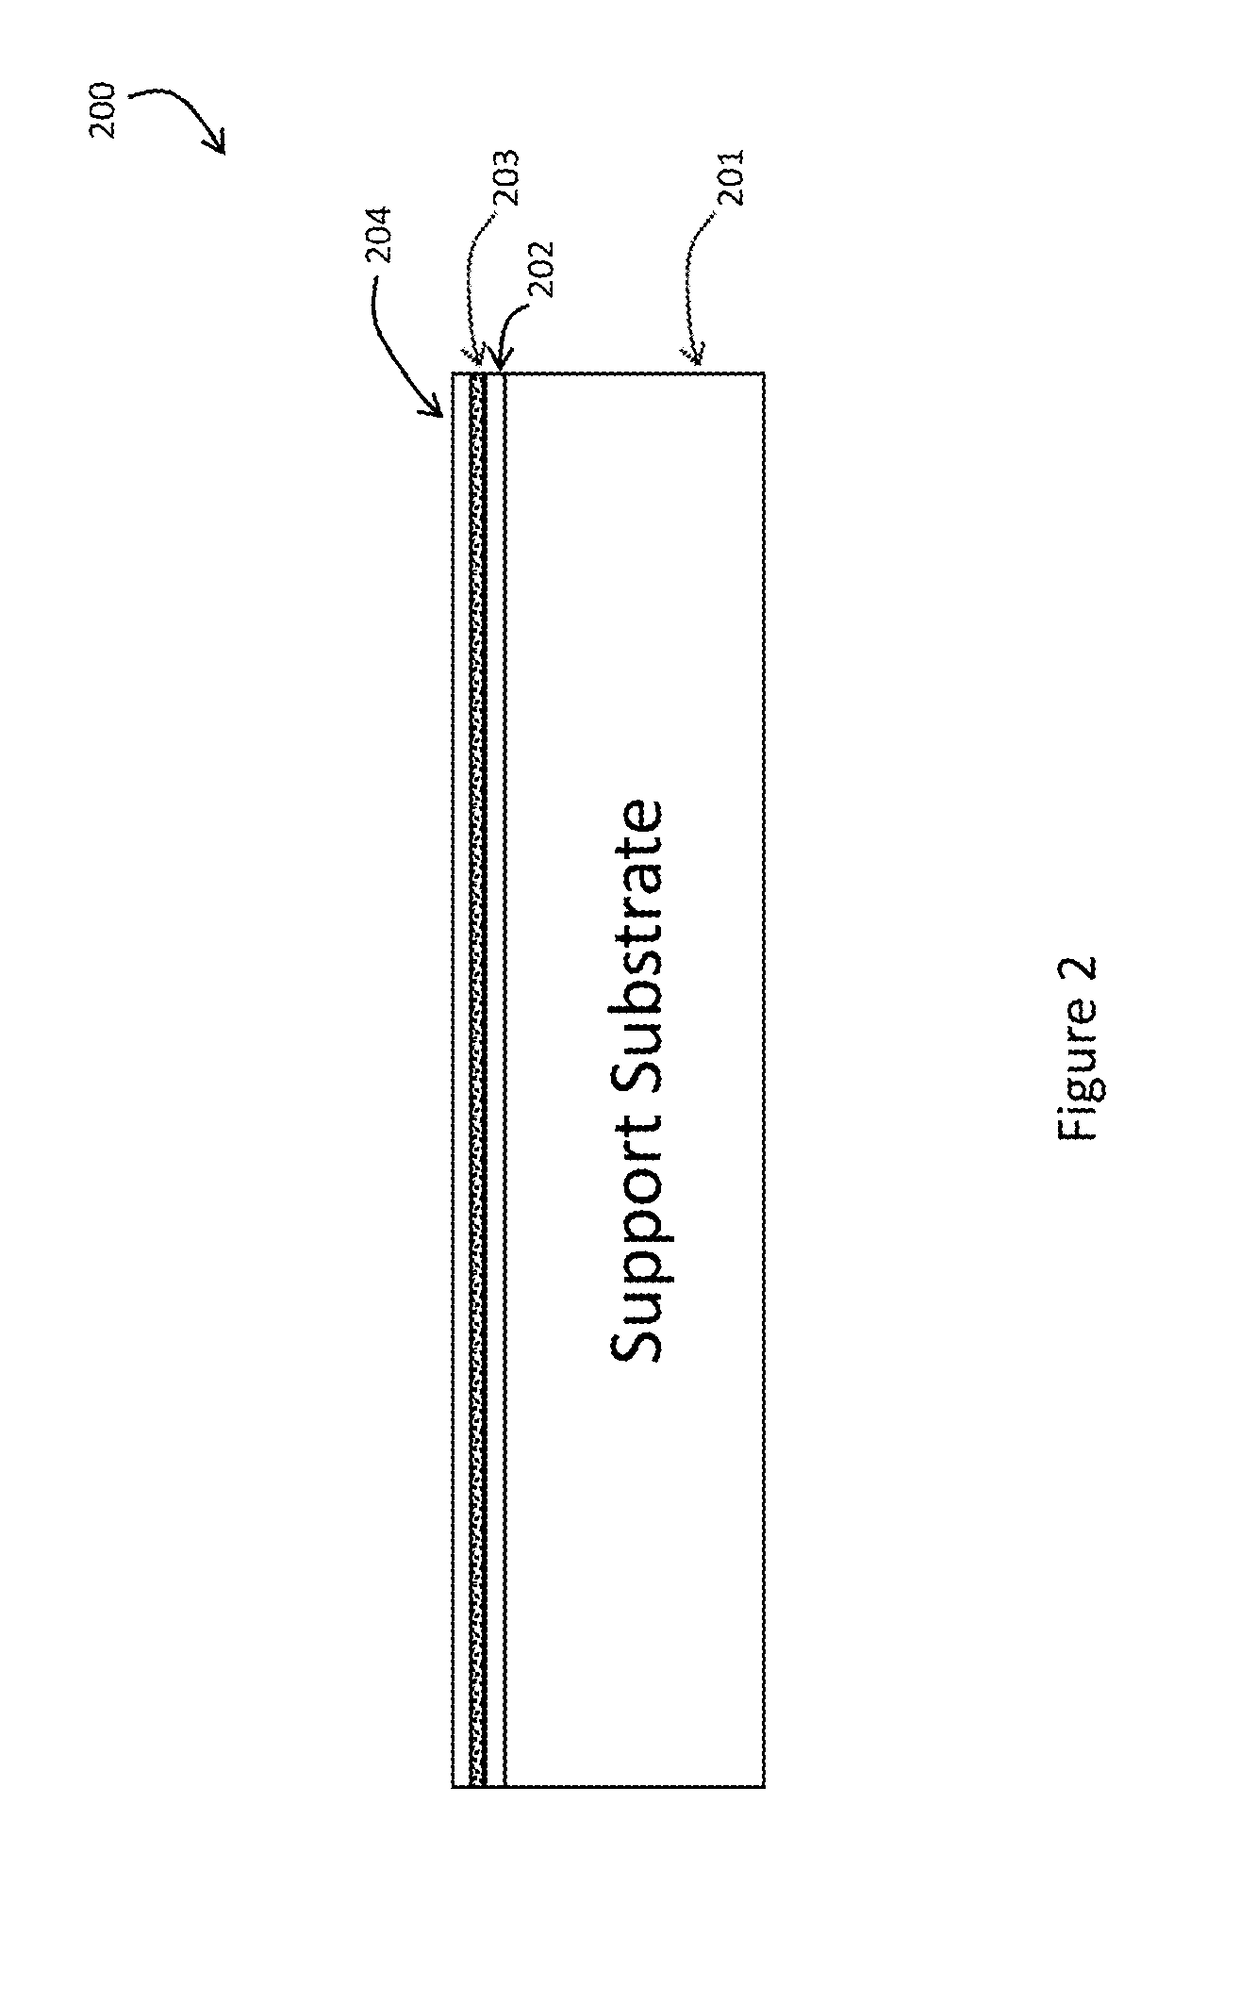 Light emitting diode (LED) test apparatus and method of manufacture